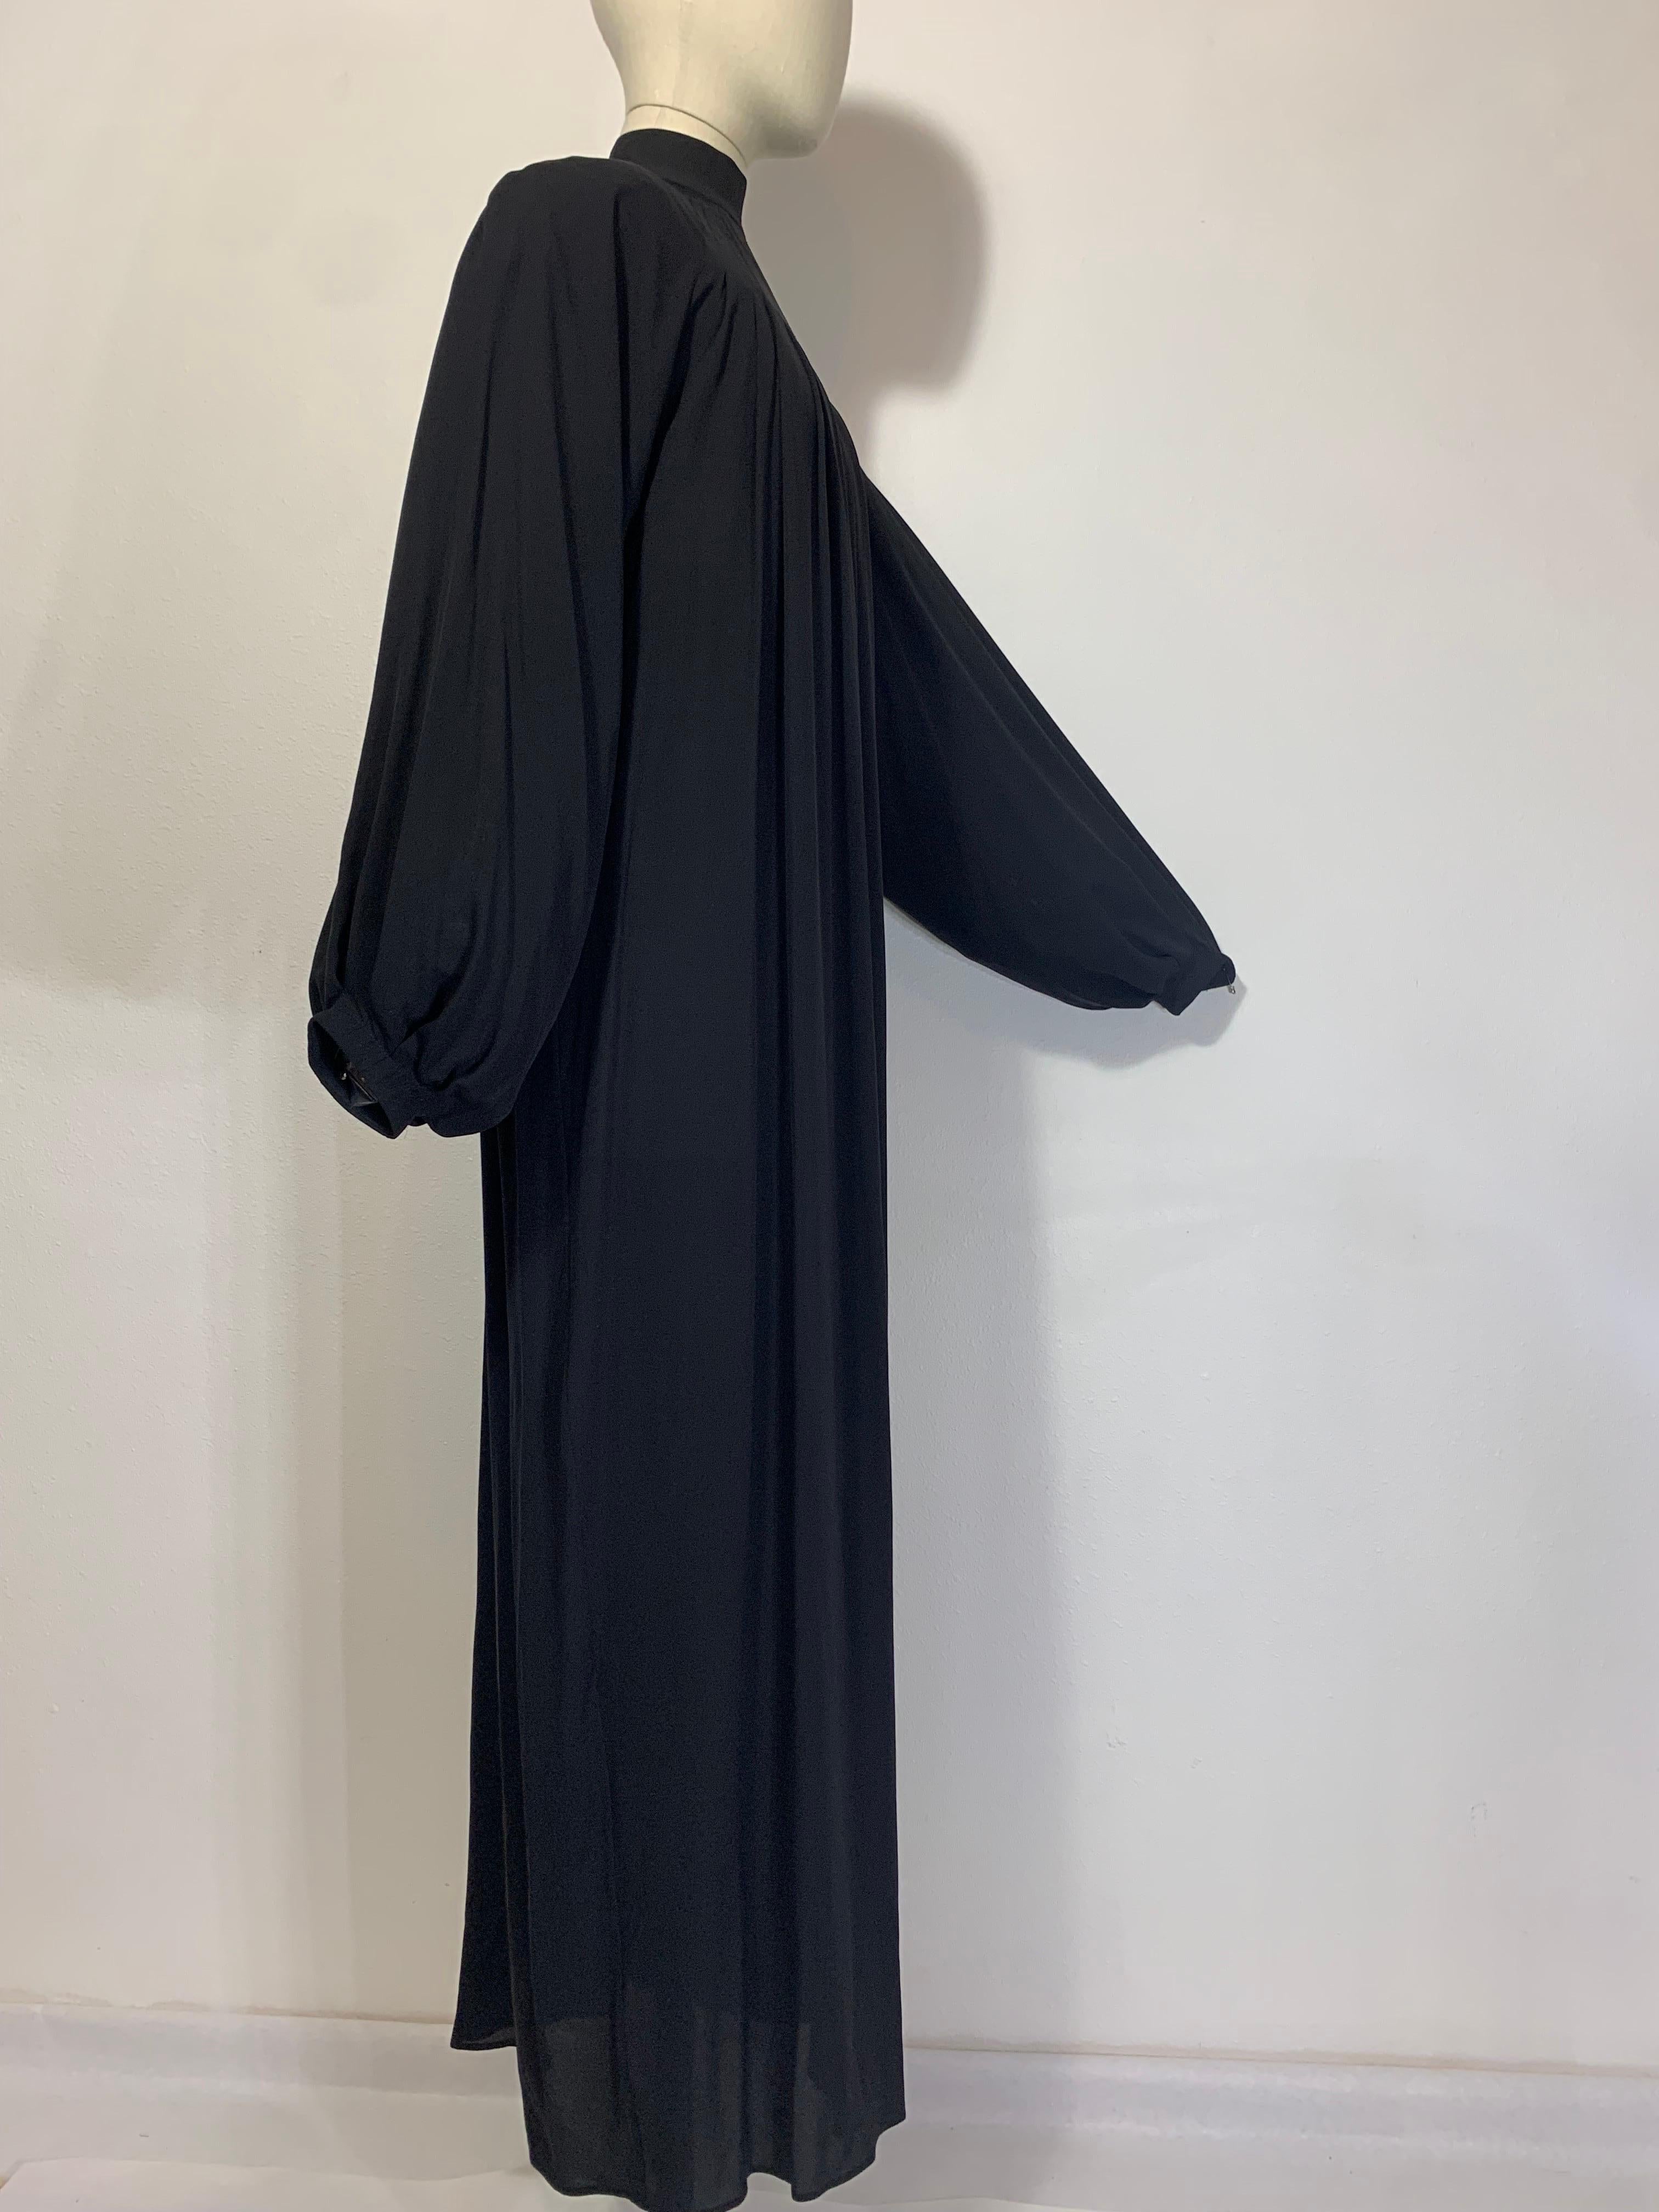 Andrew Gn Black Silk Crepe Monastic-Styled Maxi Dress w Full Pleats & High Neck  For Sale 5